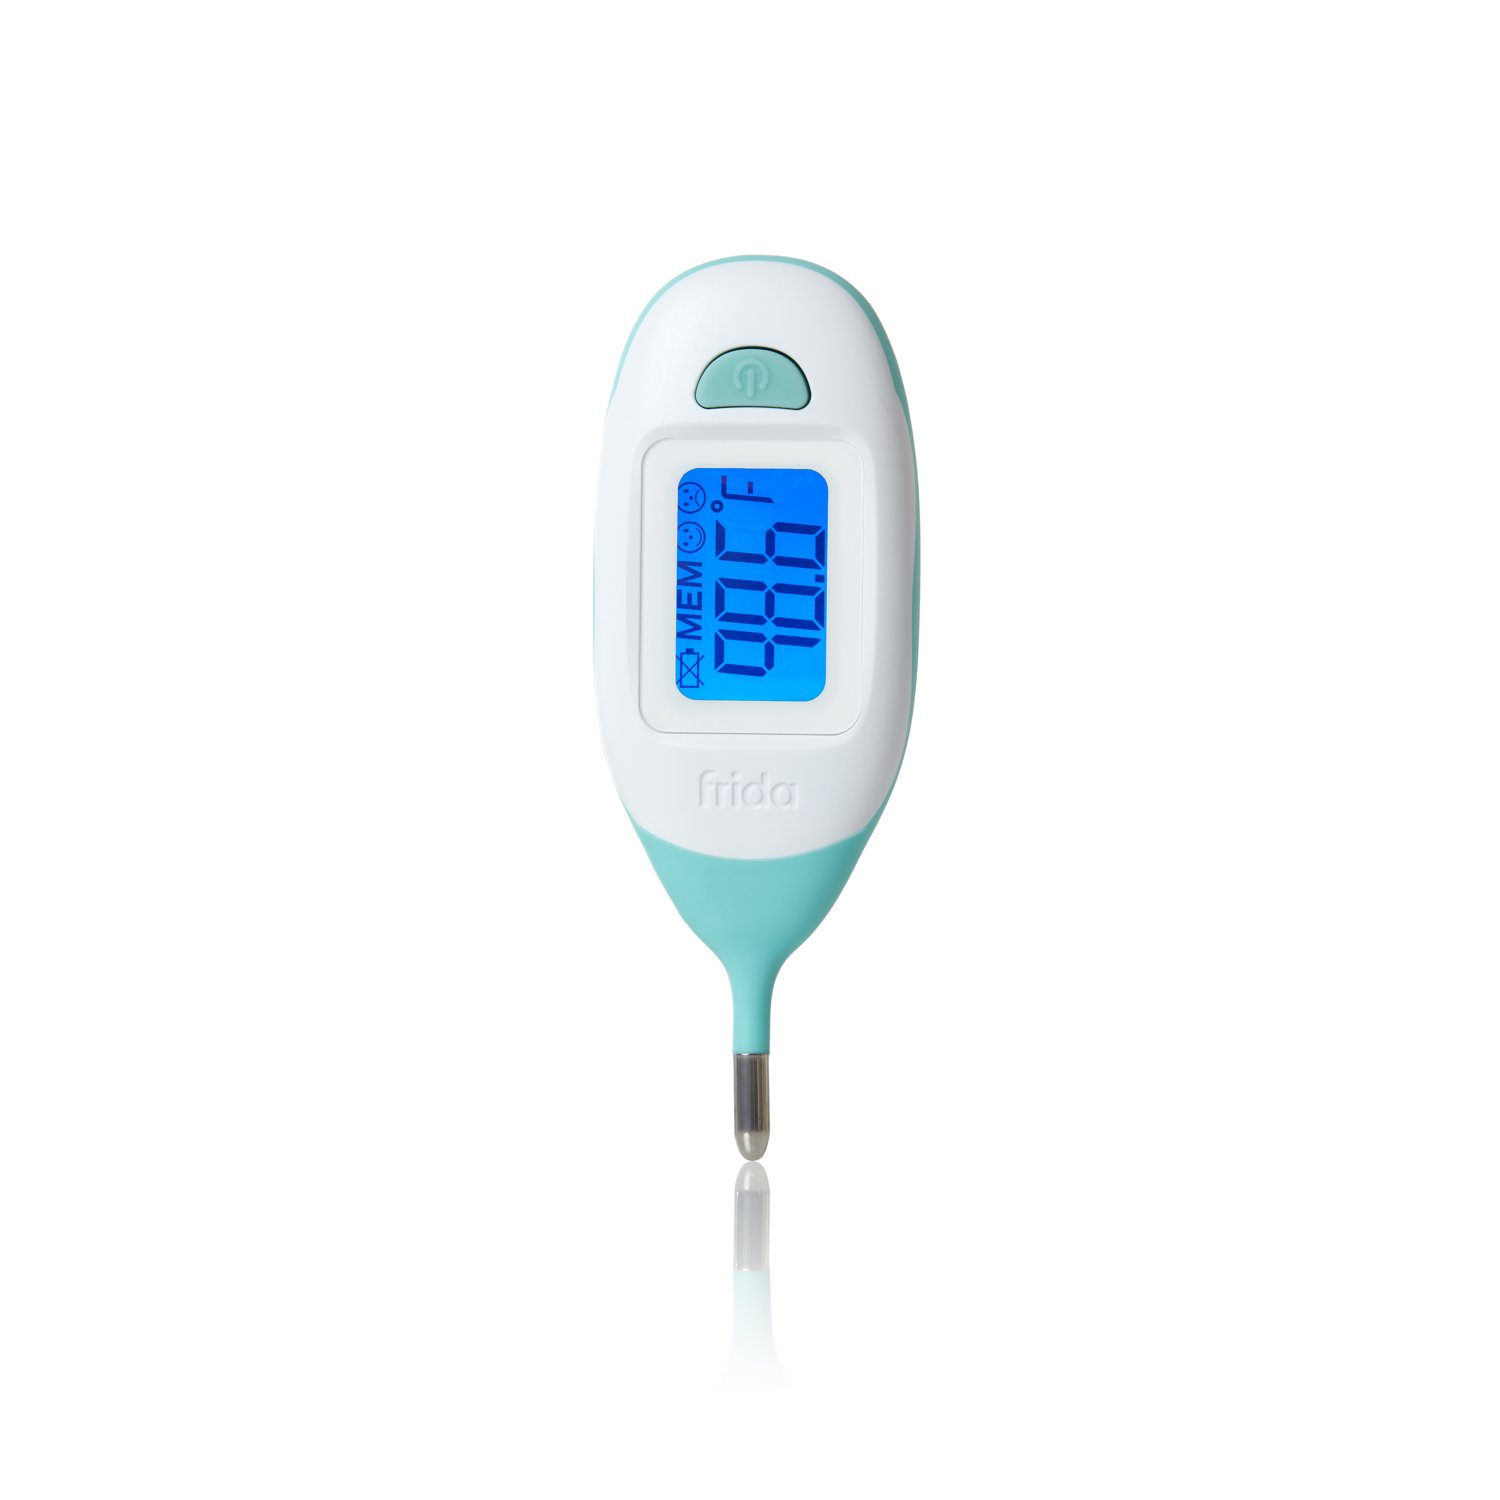 Frida Baby Quick-Read Digital Rectal Thermometer for Accurate Infant Temperature Readings - image 4 of 11